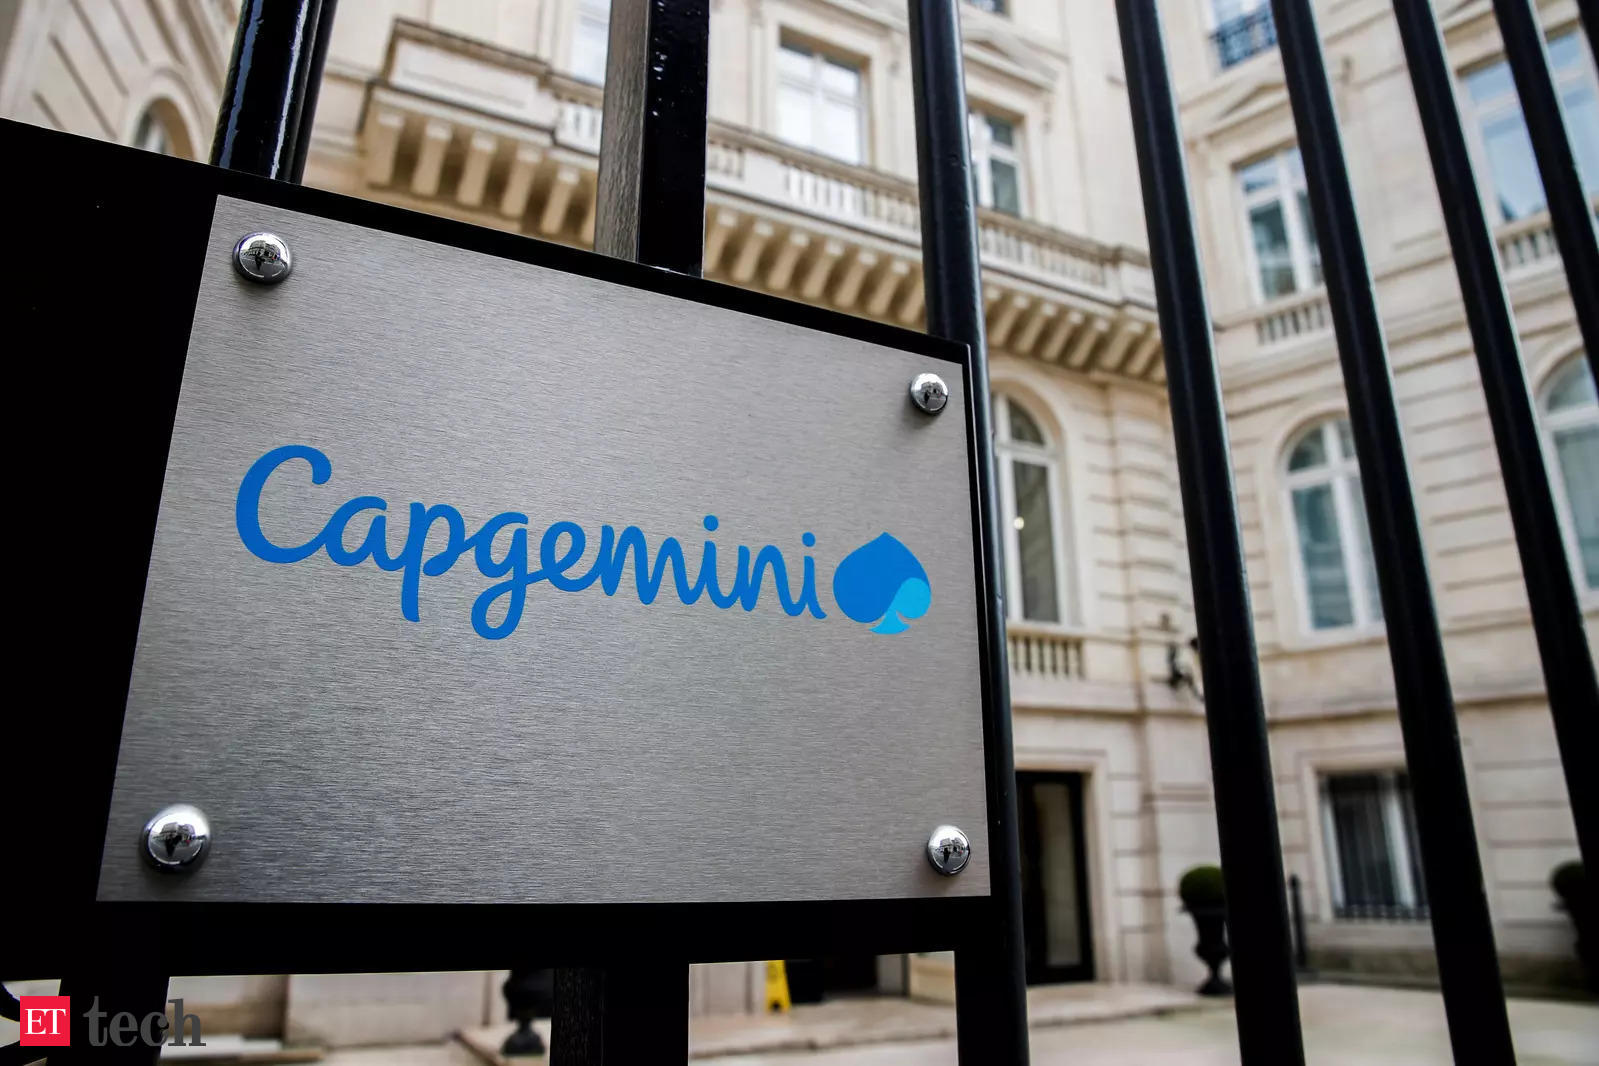 capgemini revenue guidance: capgemini gives a muted revenue guidance for 2023, sees uptick in offshoring demand - the economic times